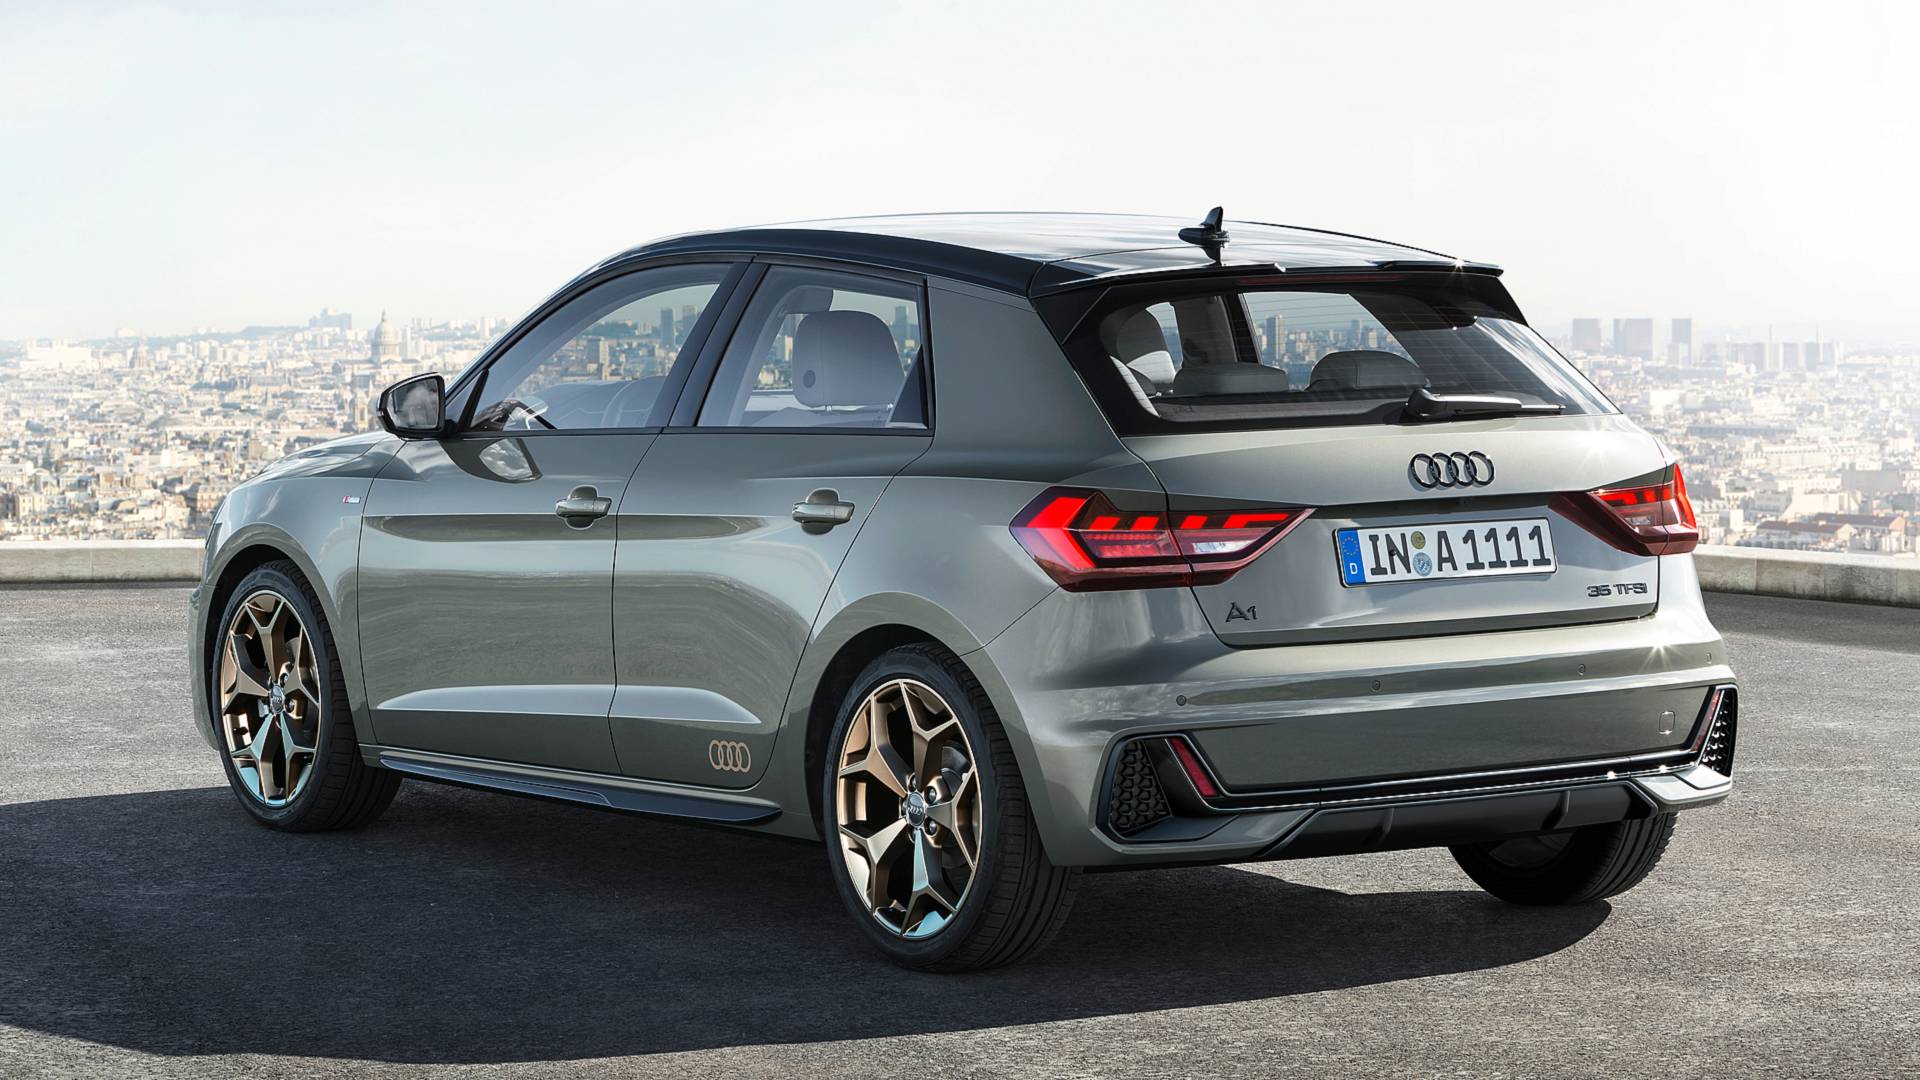 2019 Audi A1 Sportback All The Details, Full Gallery And A Video